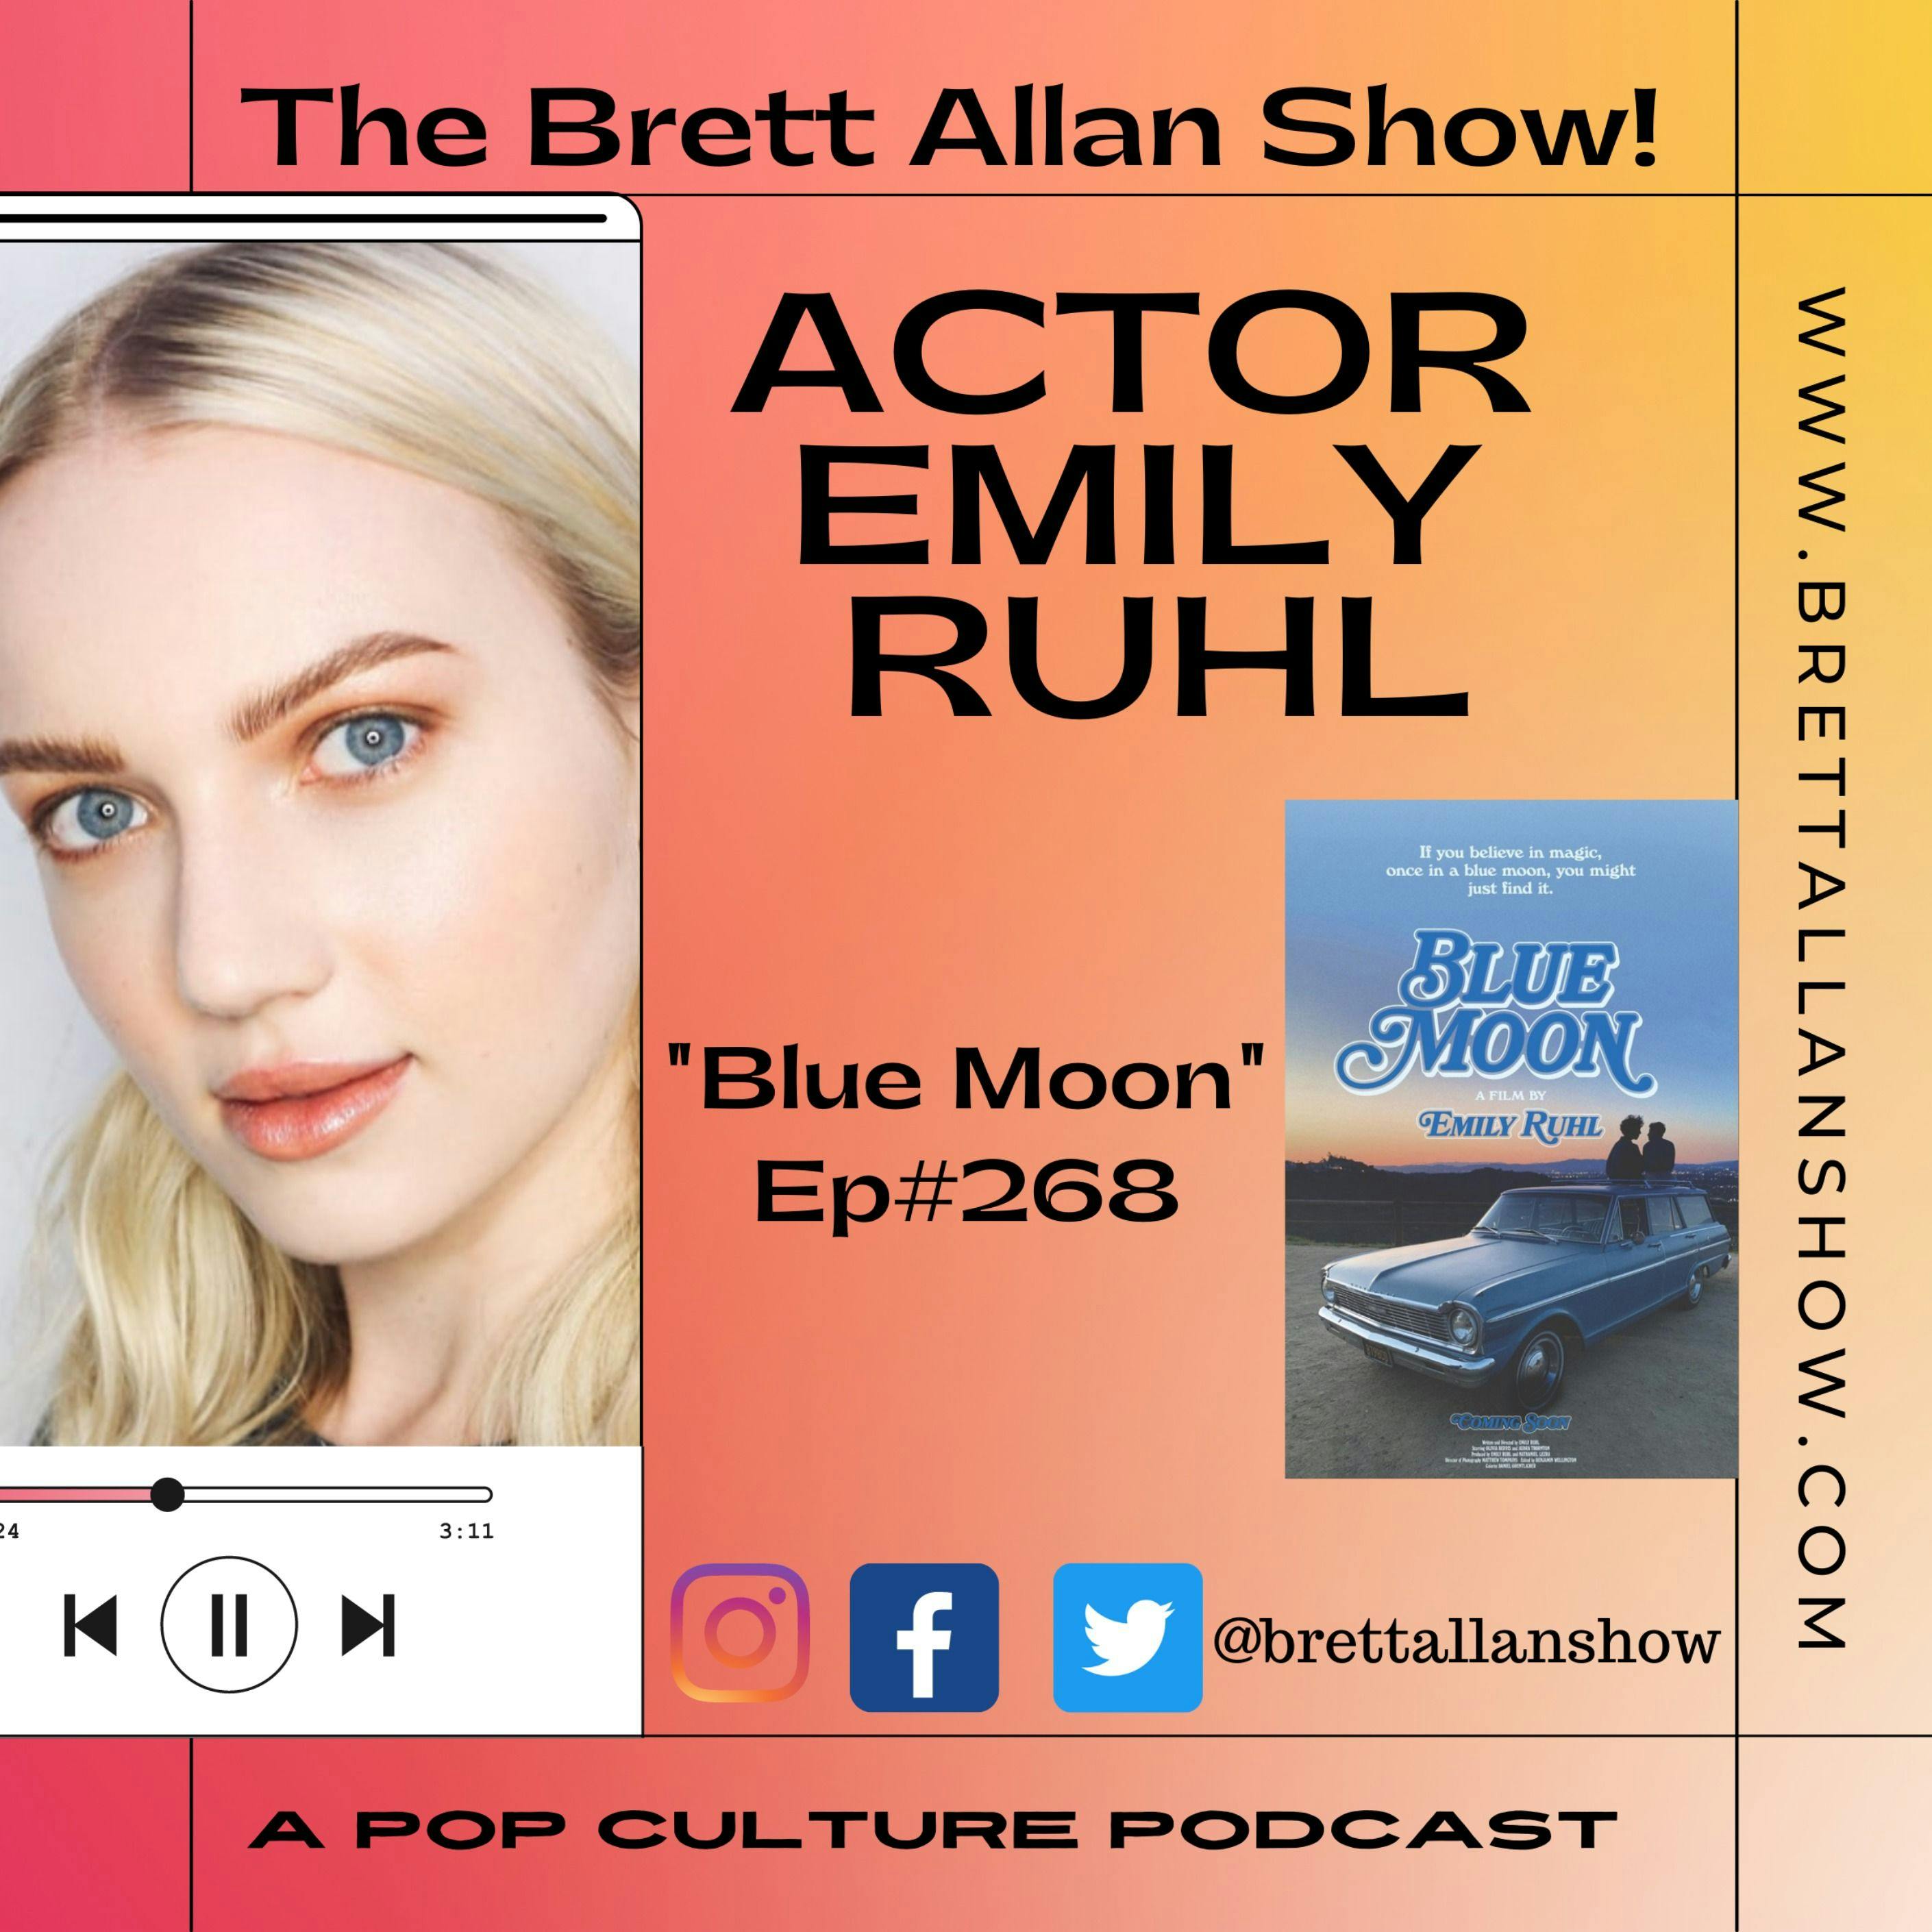 Actor Emily Ruhl Discusses Her Brand New Project | "Blue Moon" Available Everywhere to Stream Image